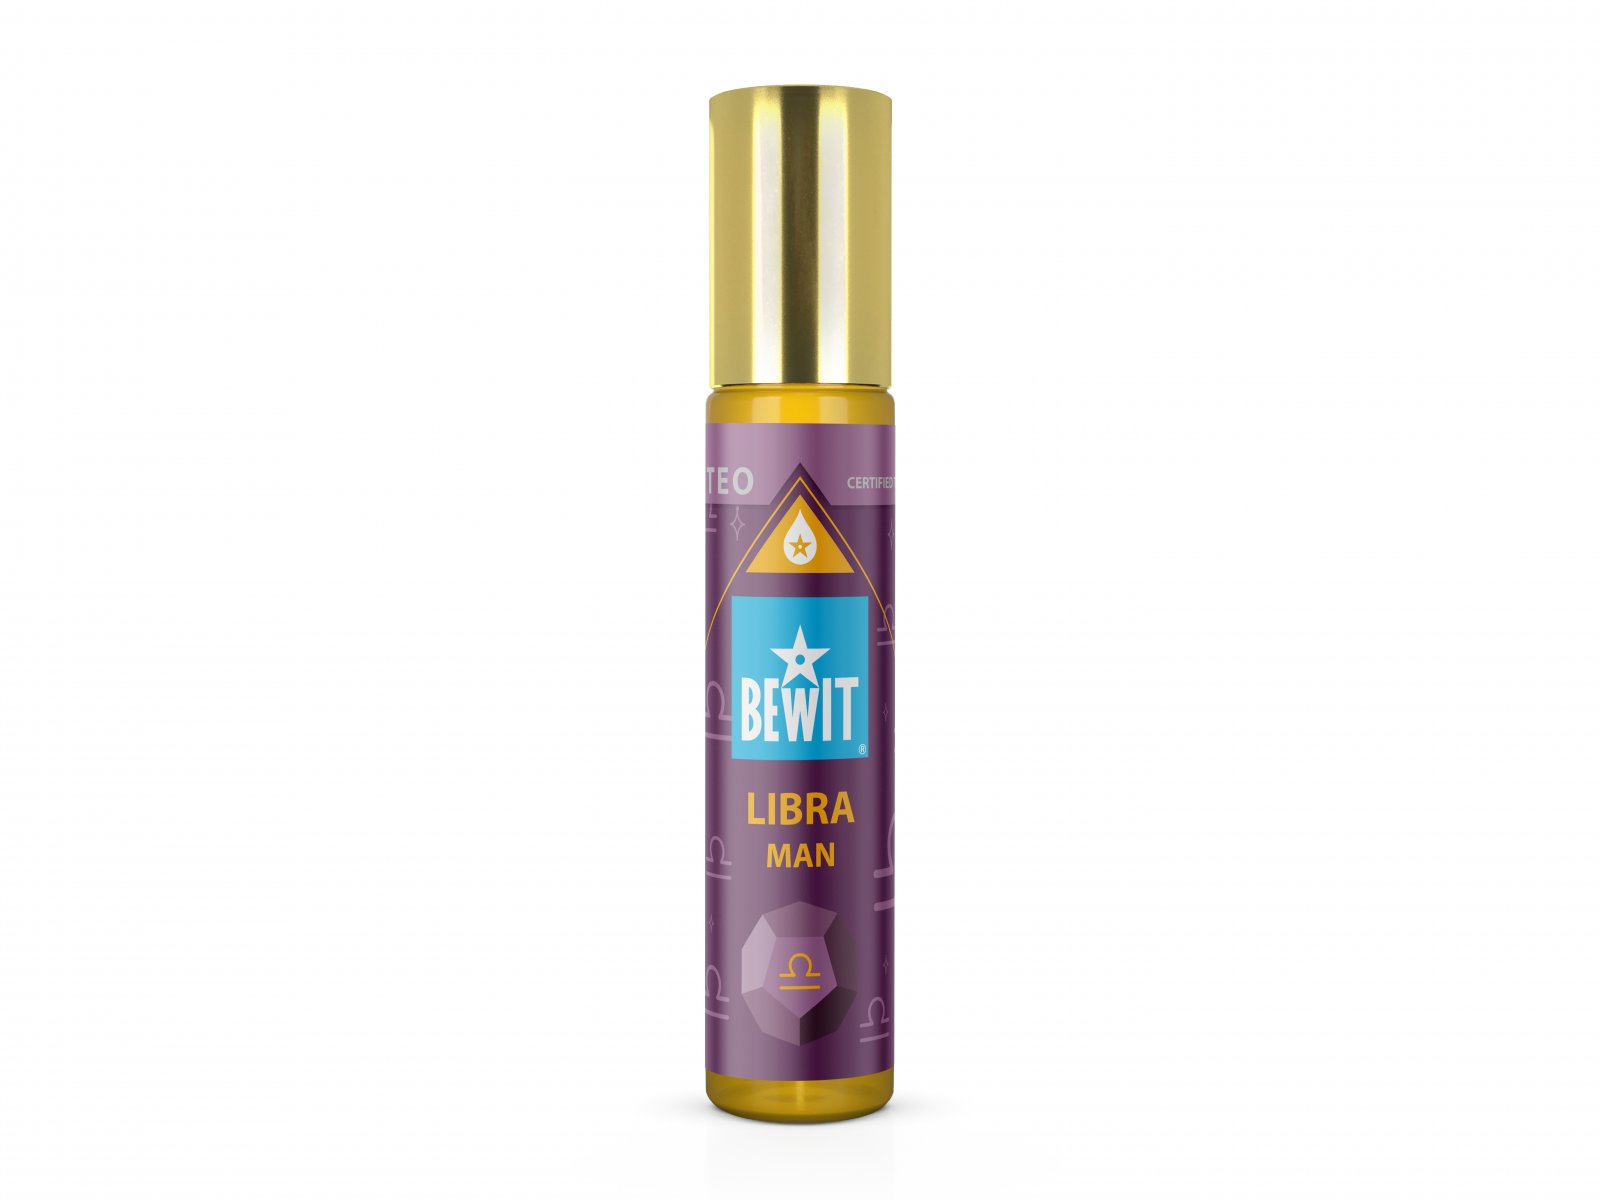 BEWIT MAN LIBRA (SCALES) - Men's roll-on oil perfume